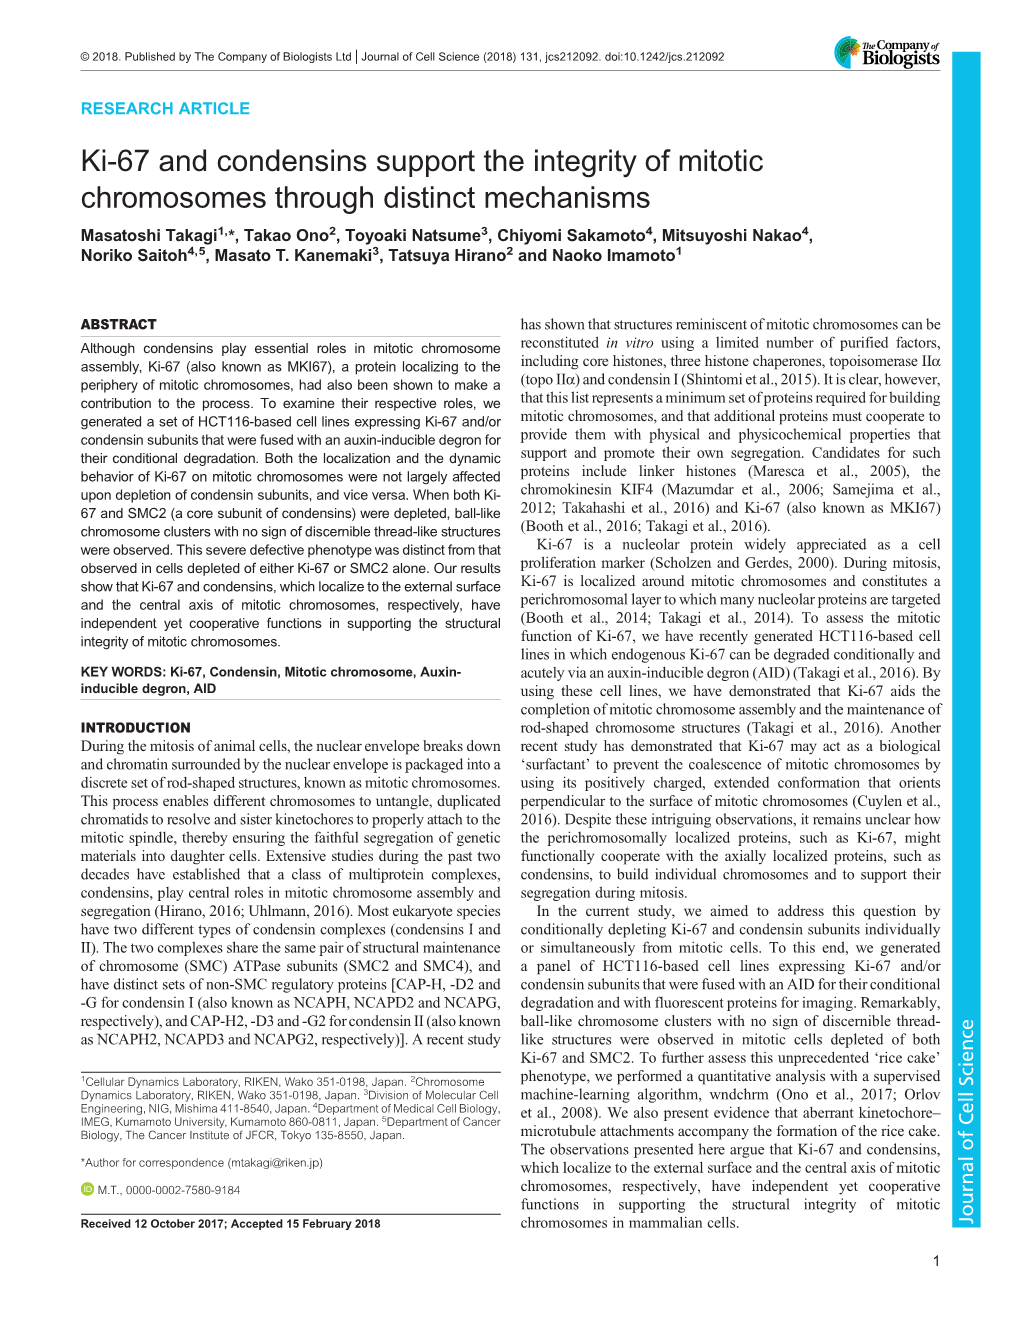 Ki-67 and Condensins Support the Integrity of Mitotic Chromosomes